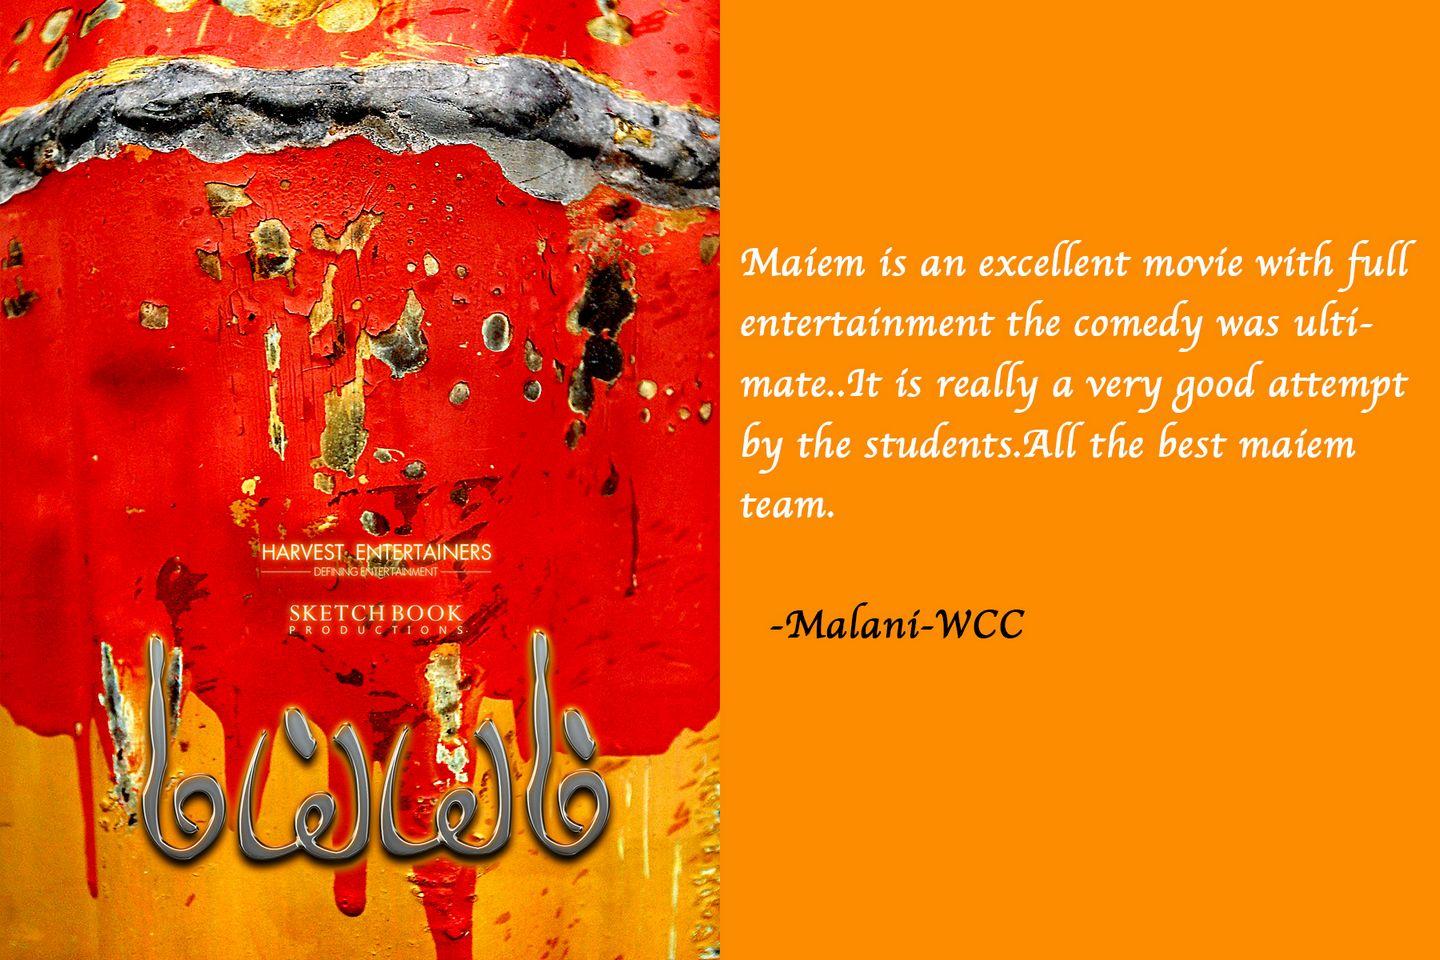 Comments From Students about the Maiem